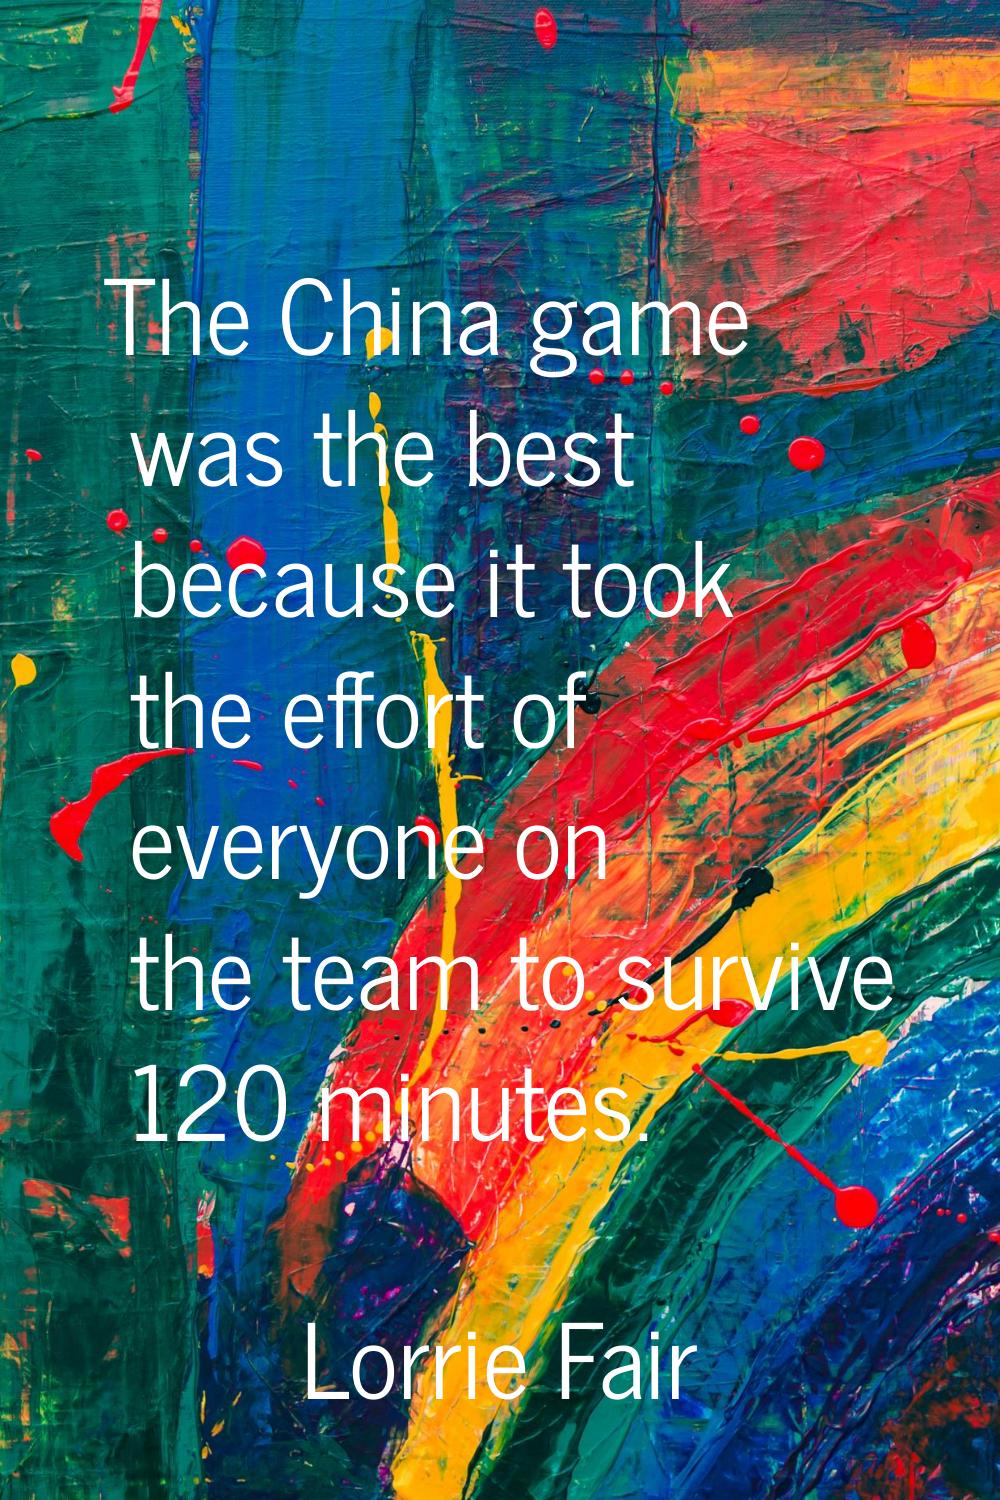 The China game was the best because it took the effort of everyone on the team to survive 120 minut